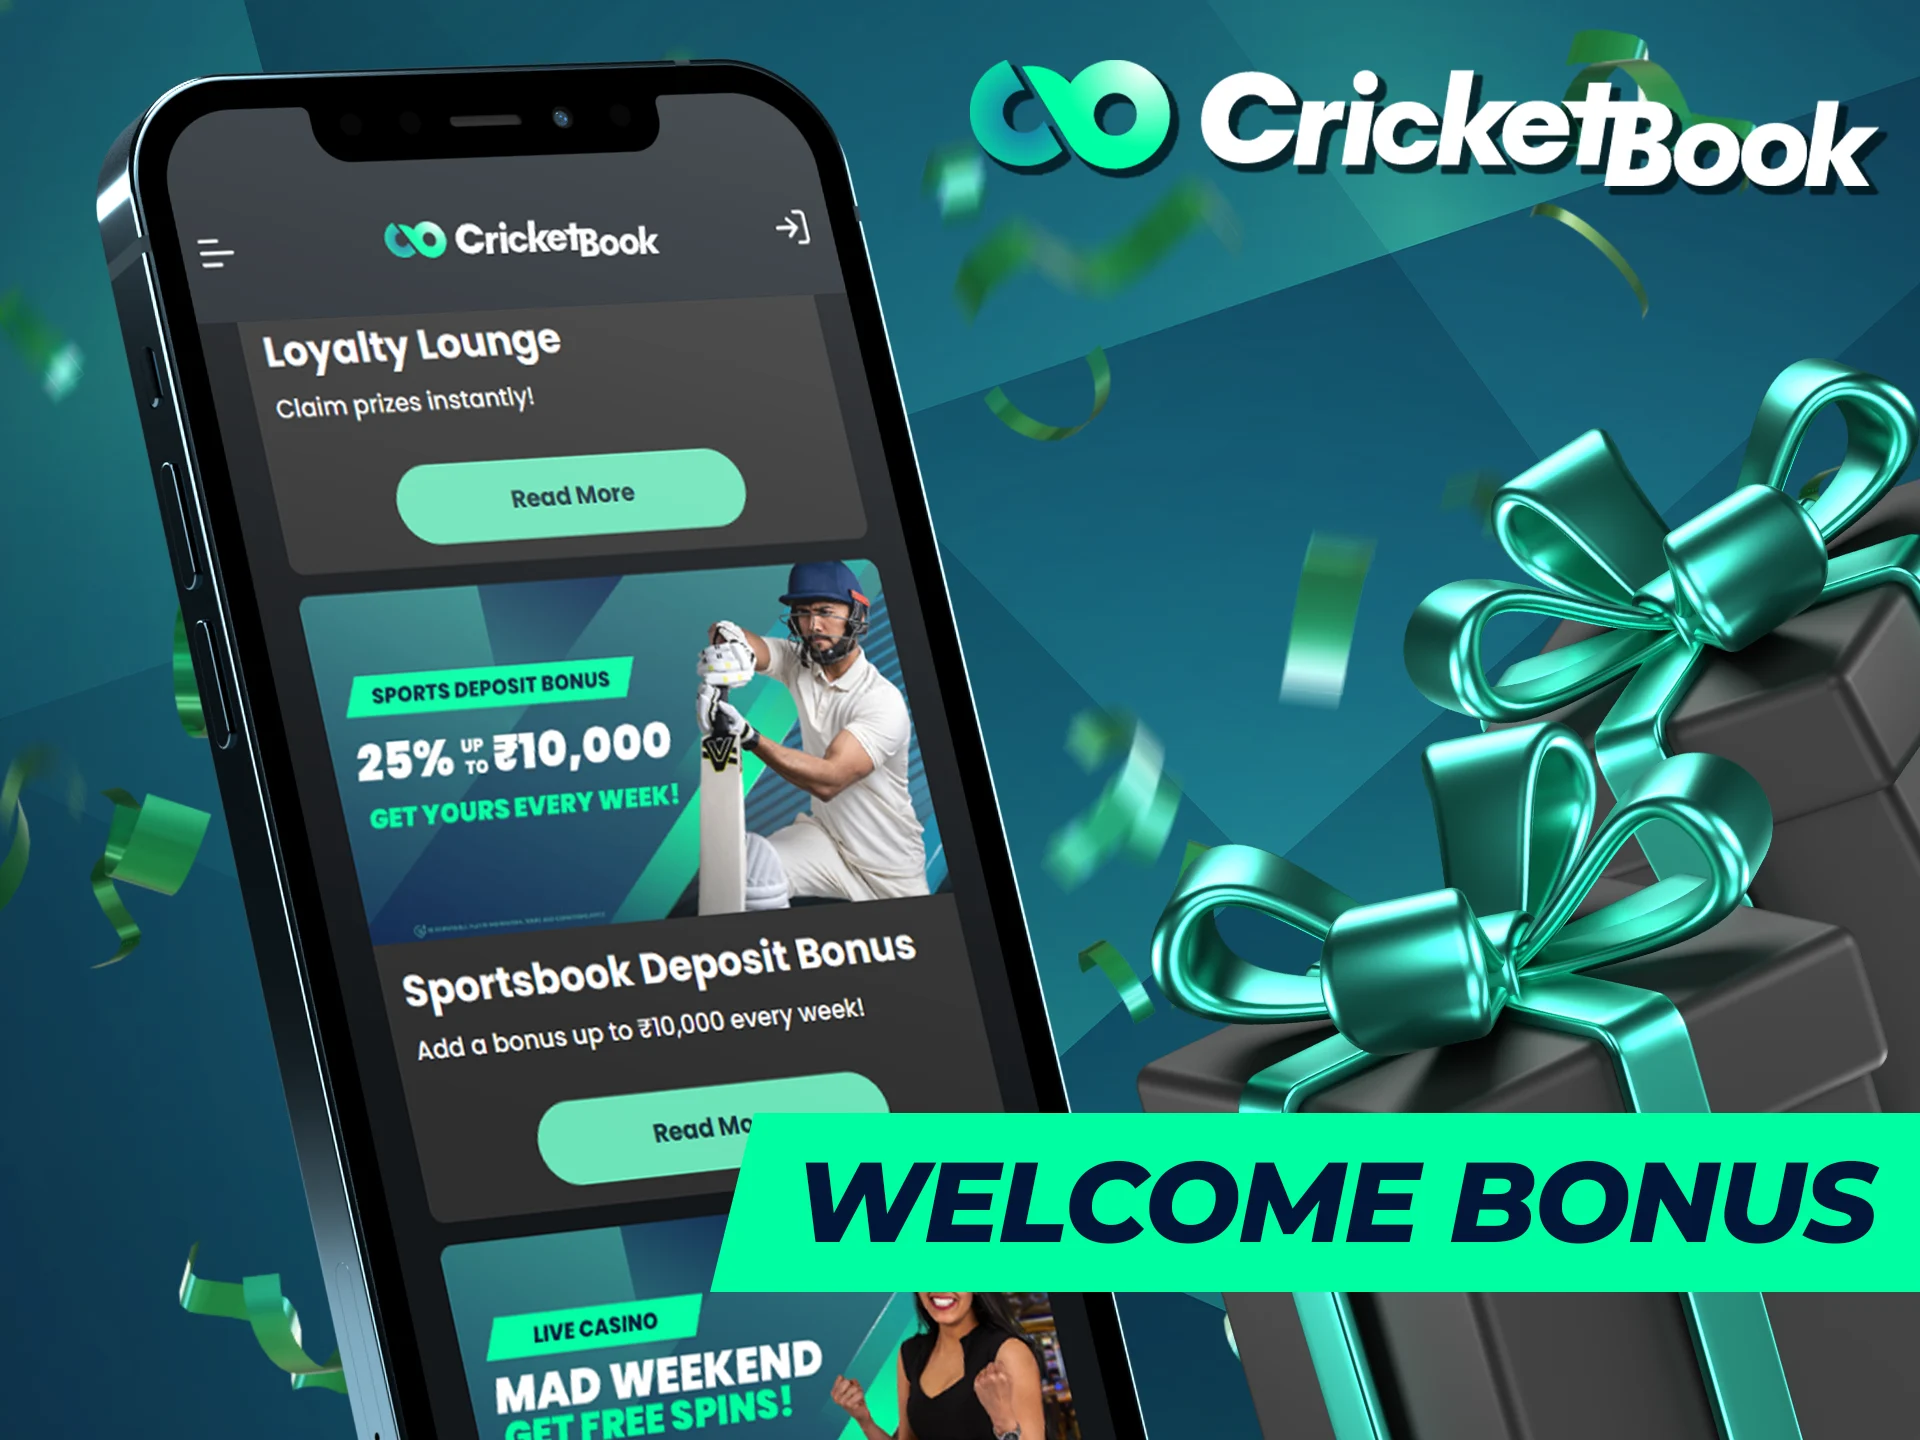 The CricketBook app offers various bonuses.